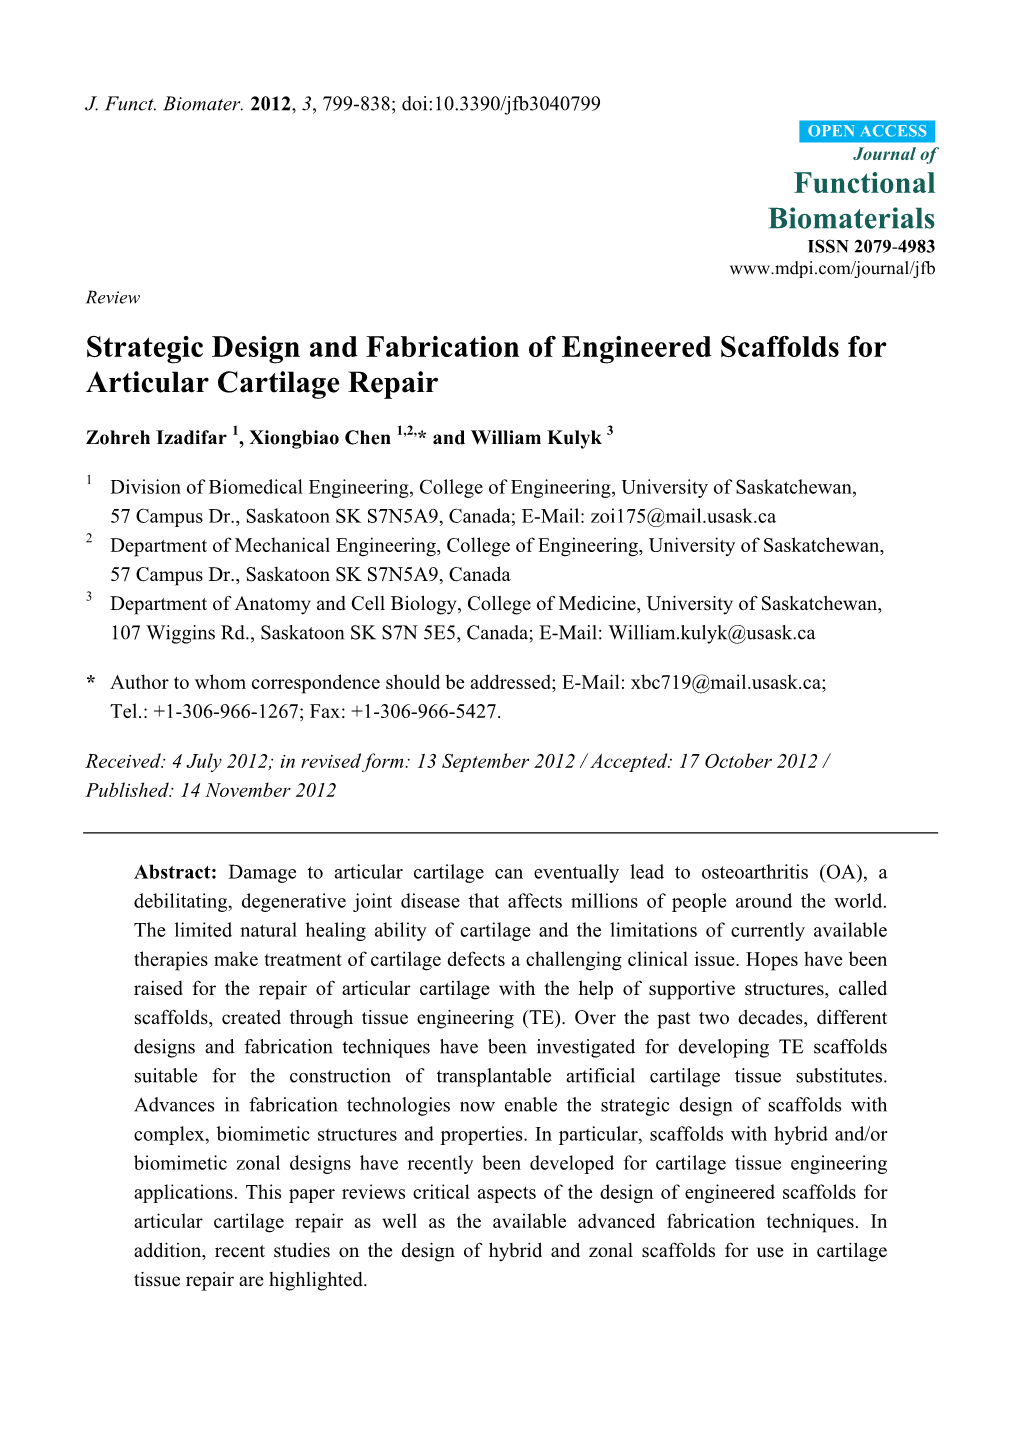 Strategic Design and Fabrication of Engineered Scaffolds for Articular Cartilage Repair